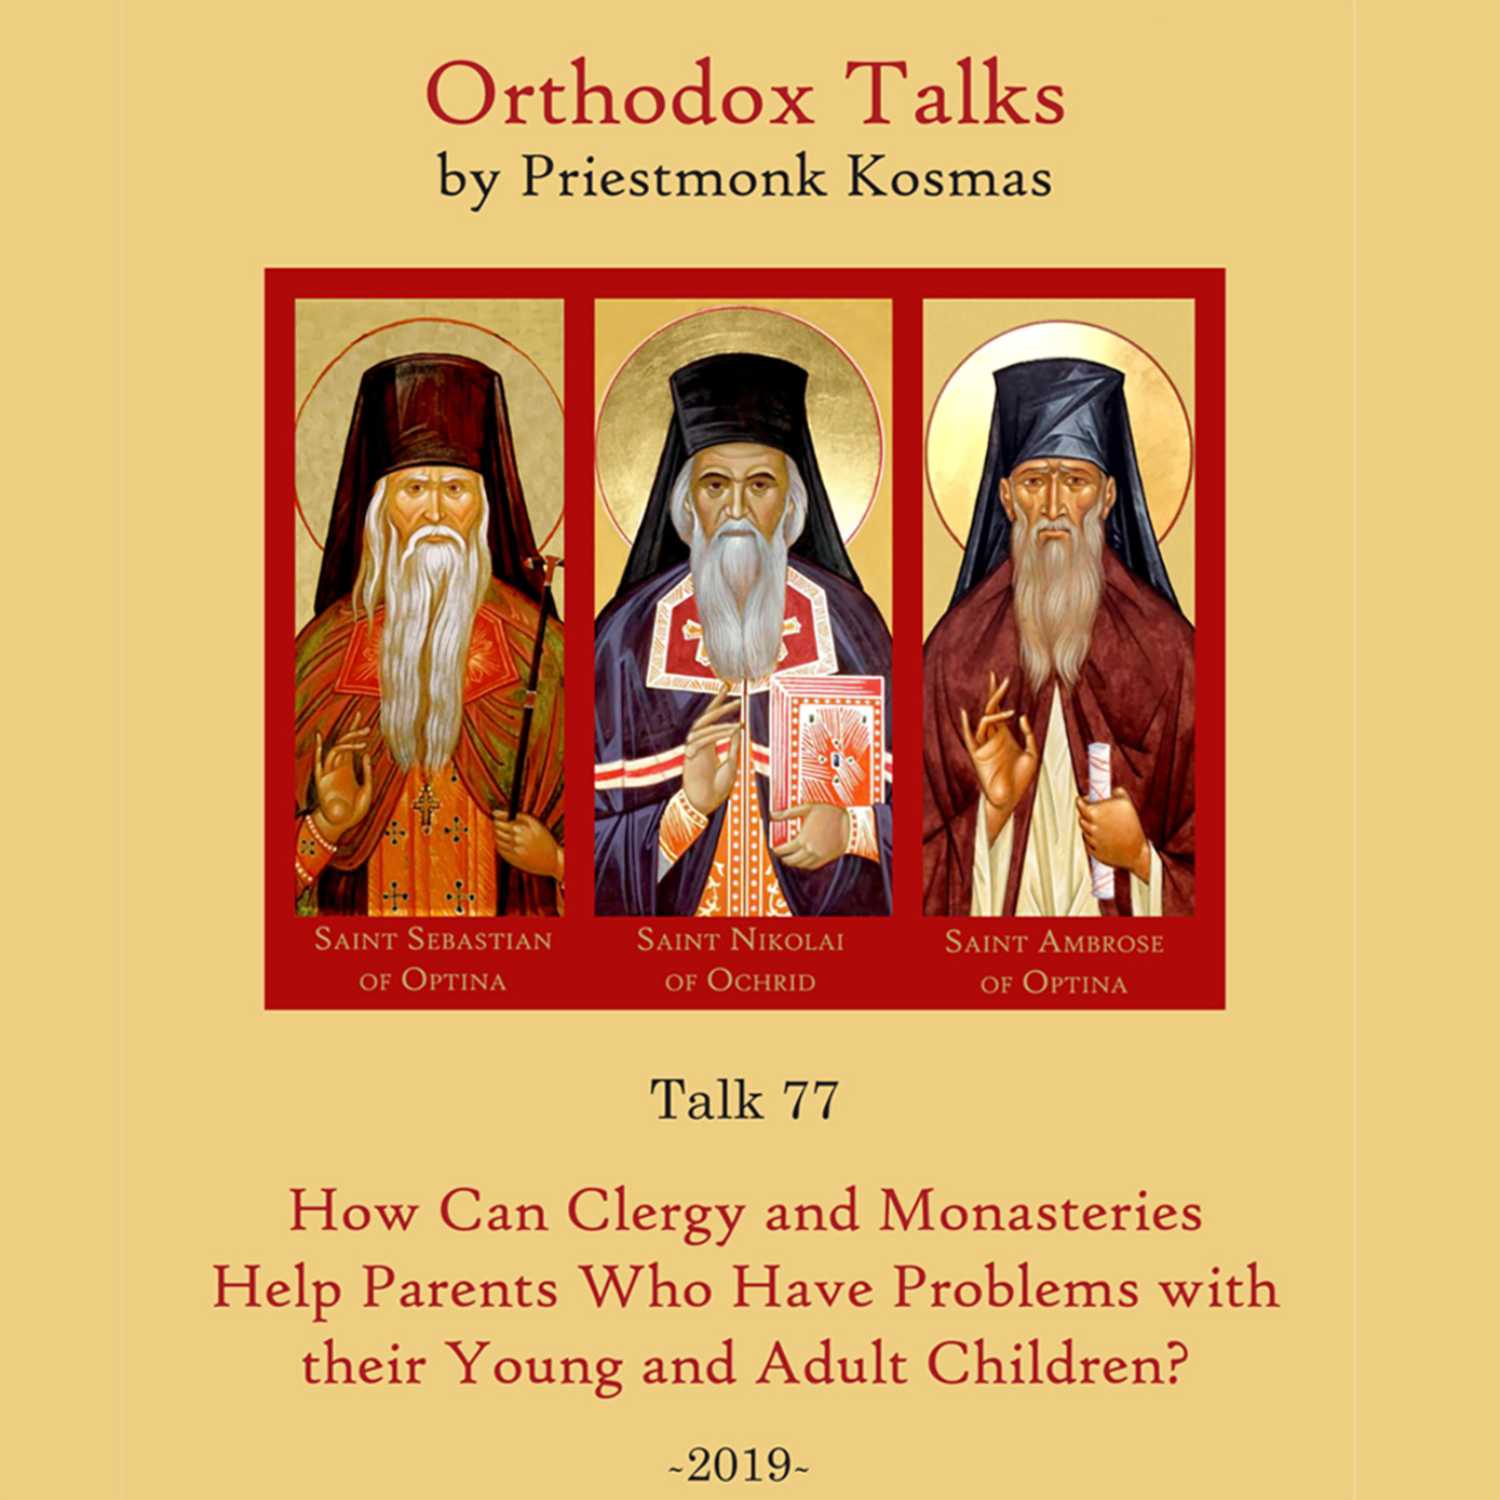 Talk 77: How Can Clergy and Monasteries Help Parents Who Have Problems with their Young and Adult Children?